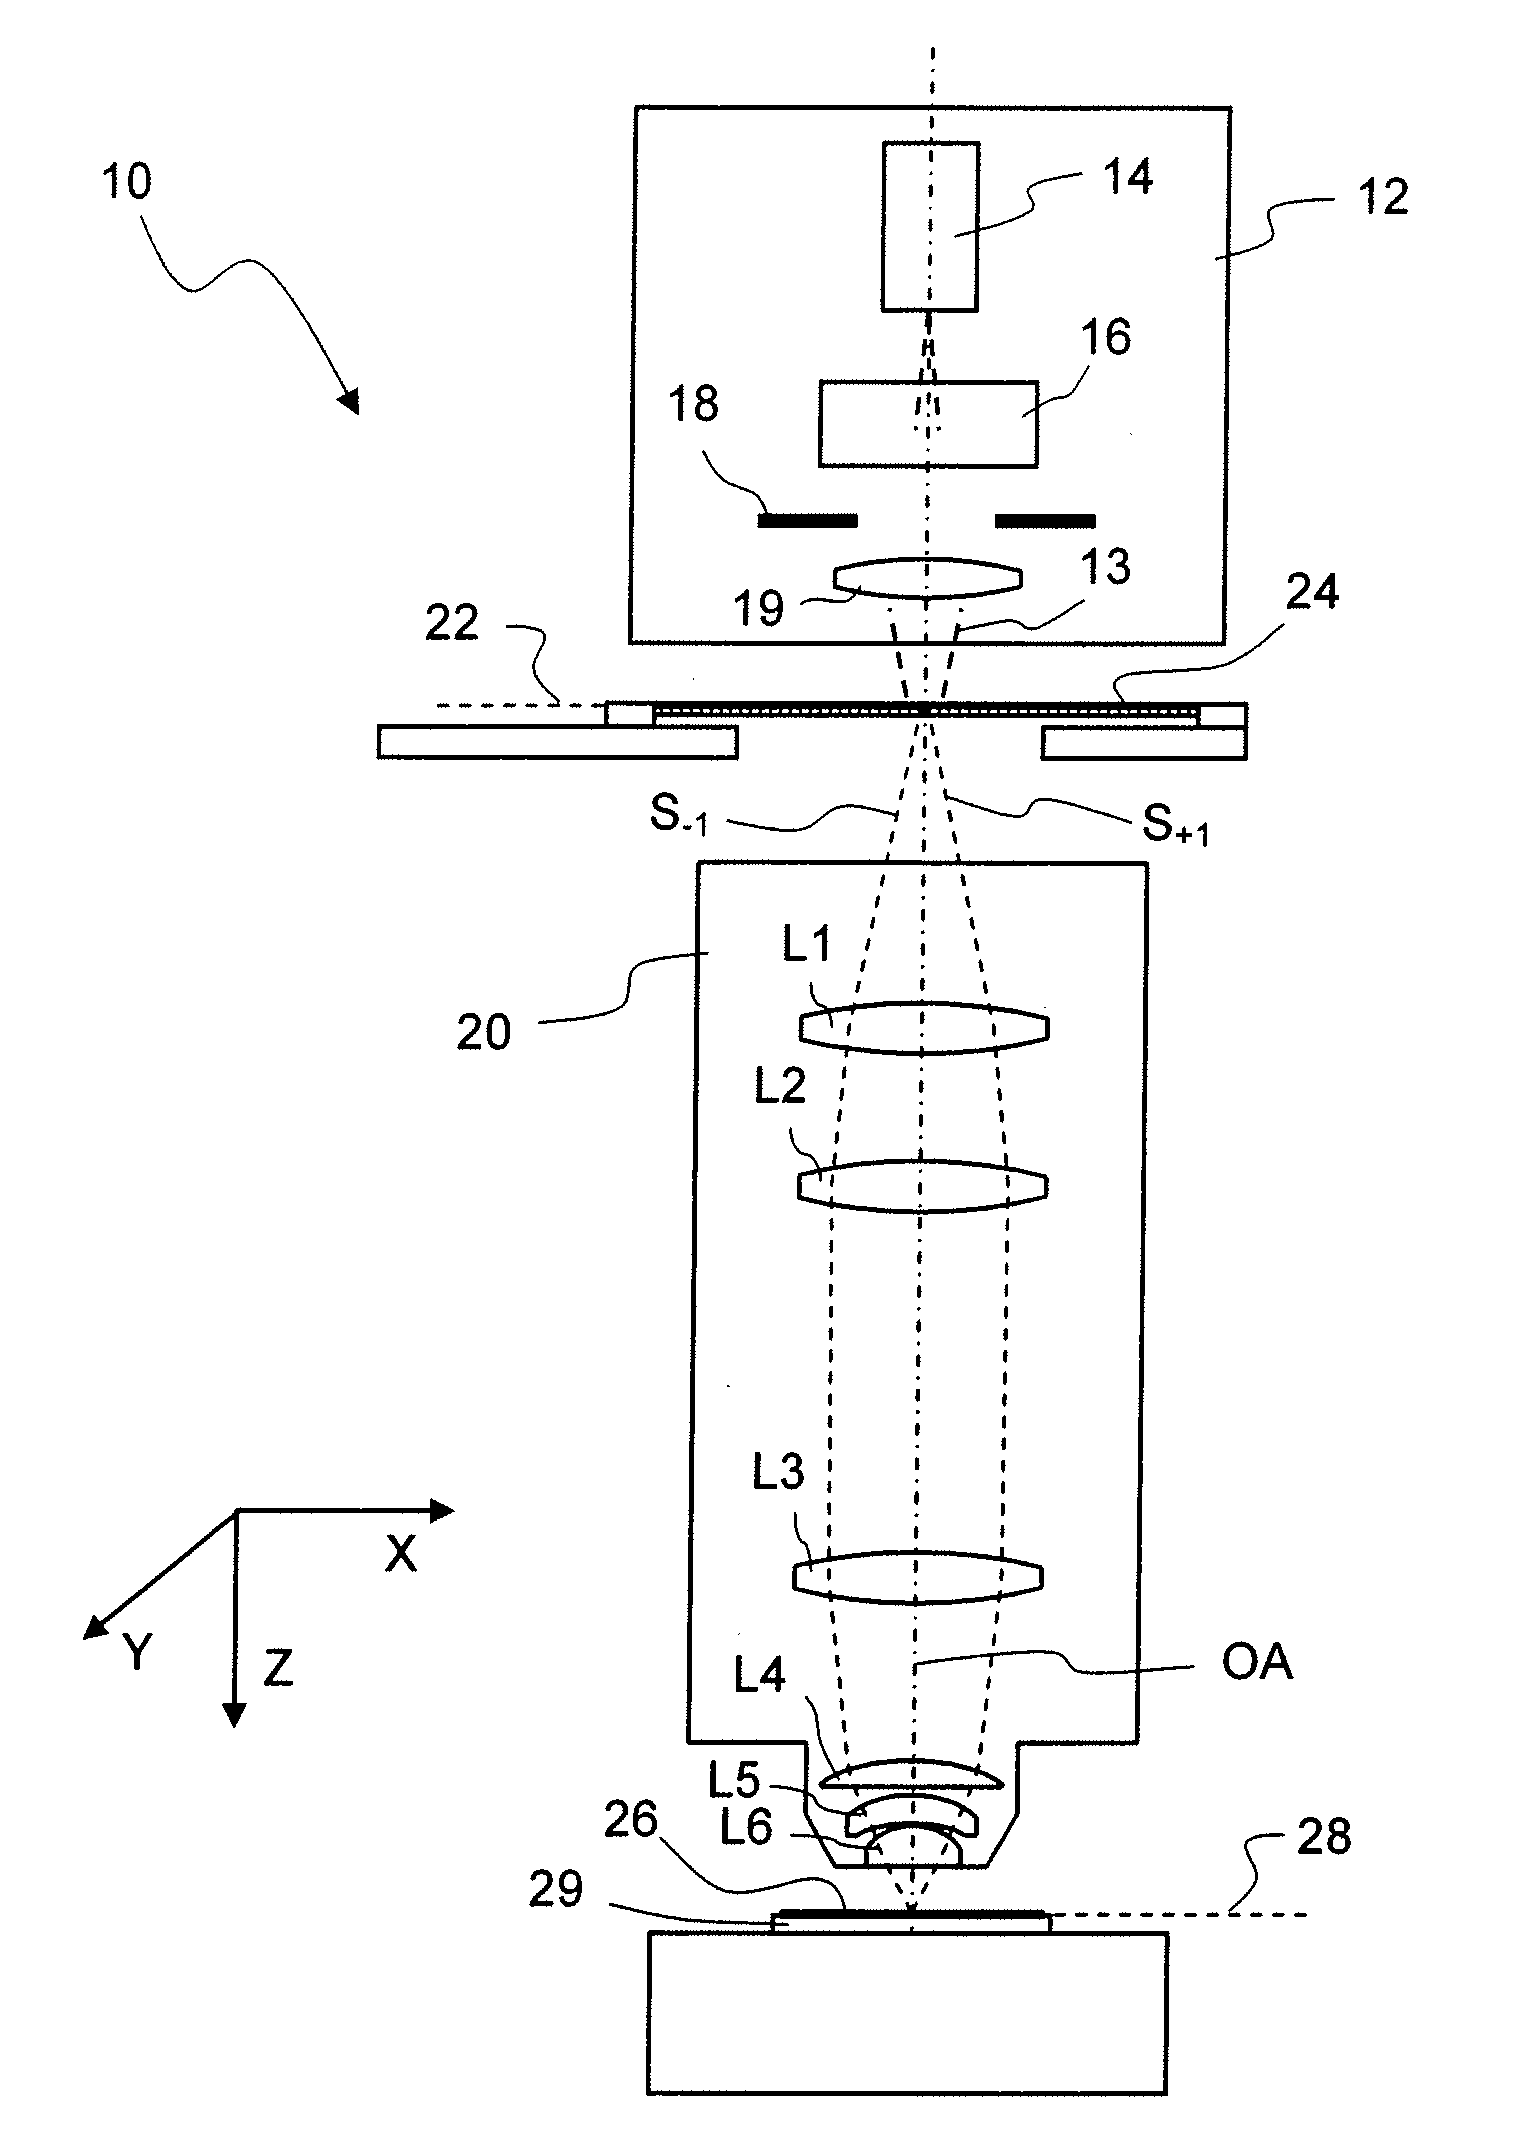 Method for describing a retardation distribution in a microlithographic projection exposure apparatus